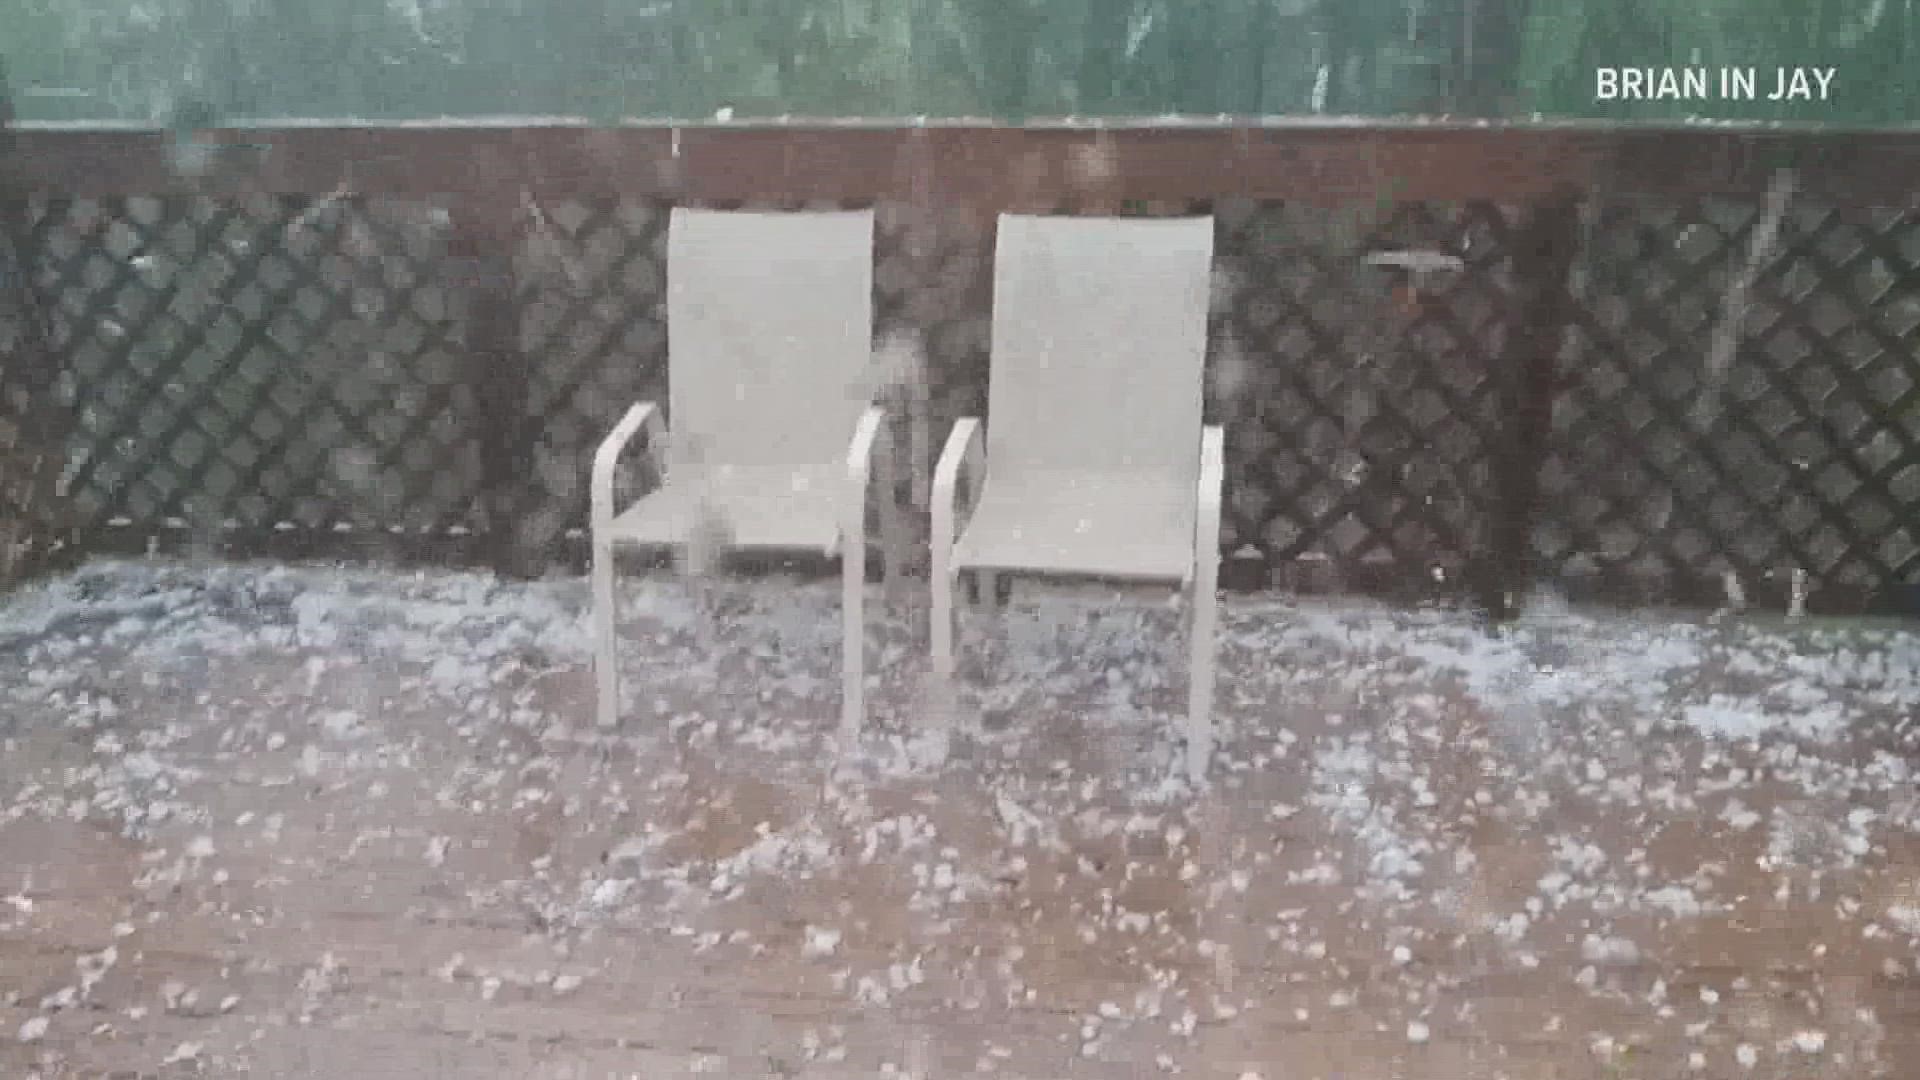 Residents of Jay and Livermore Falls say the largest hail dropped for about 15 minutes and brought plenty of property damage.